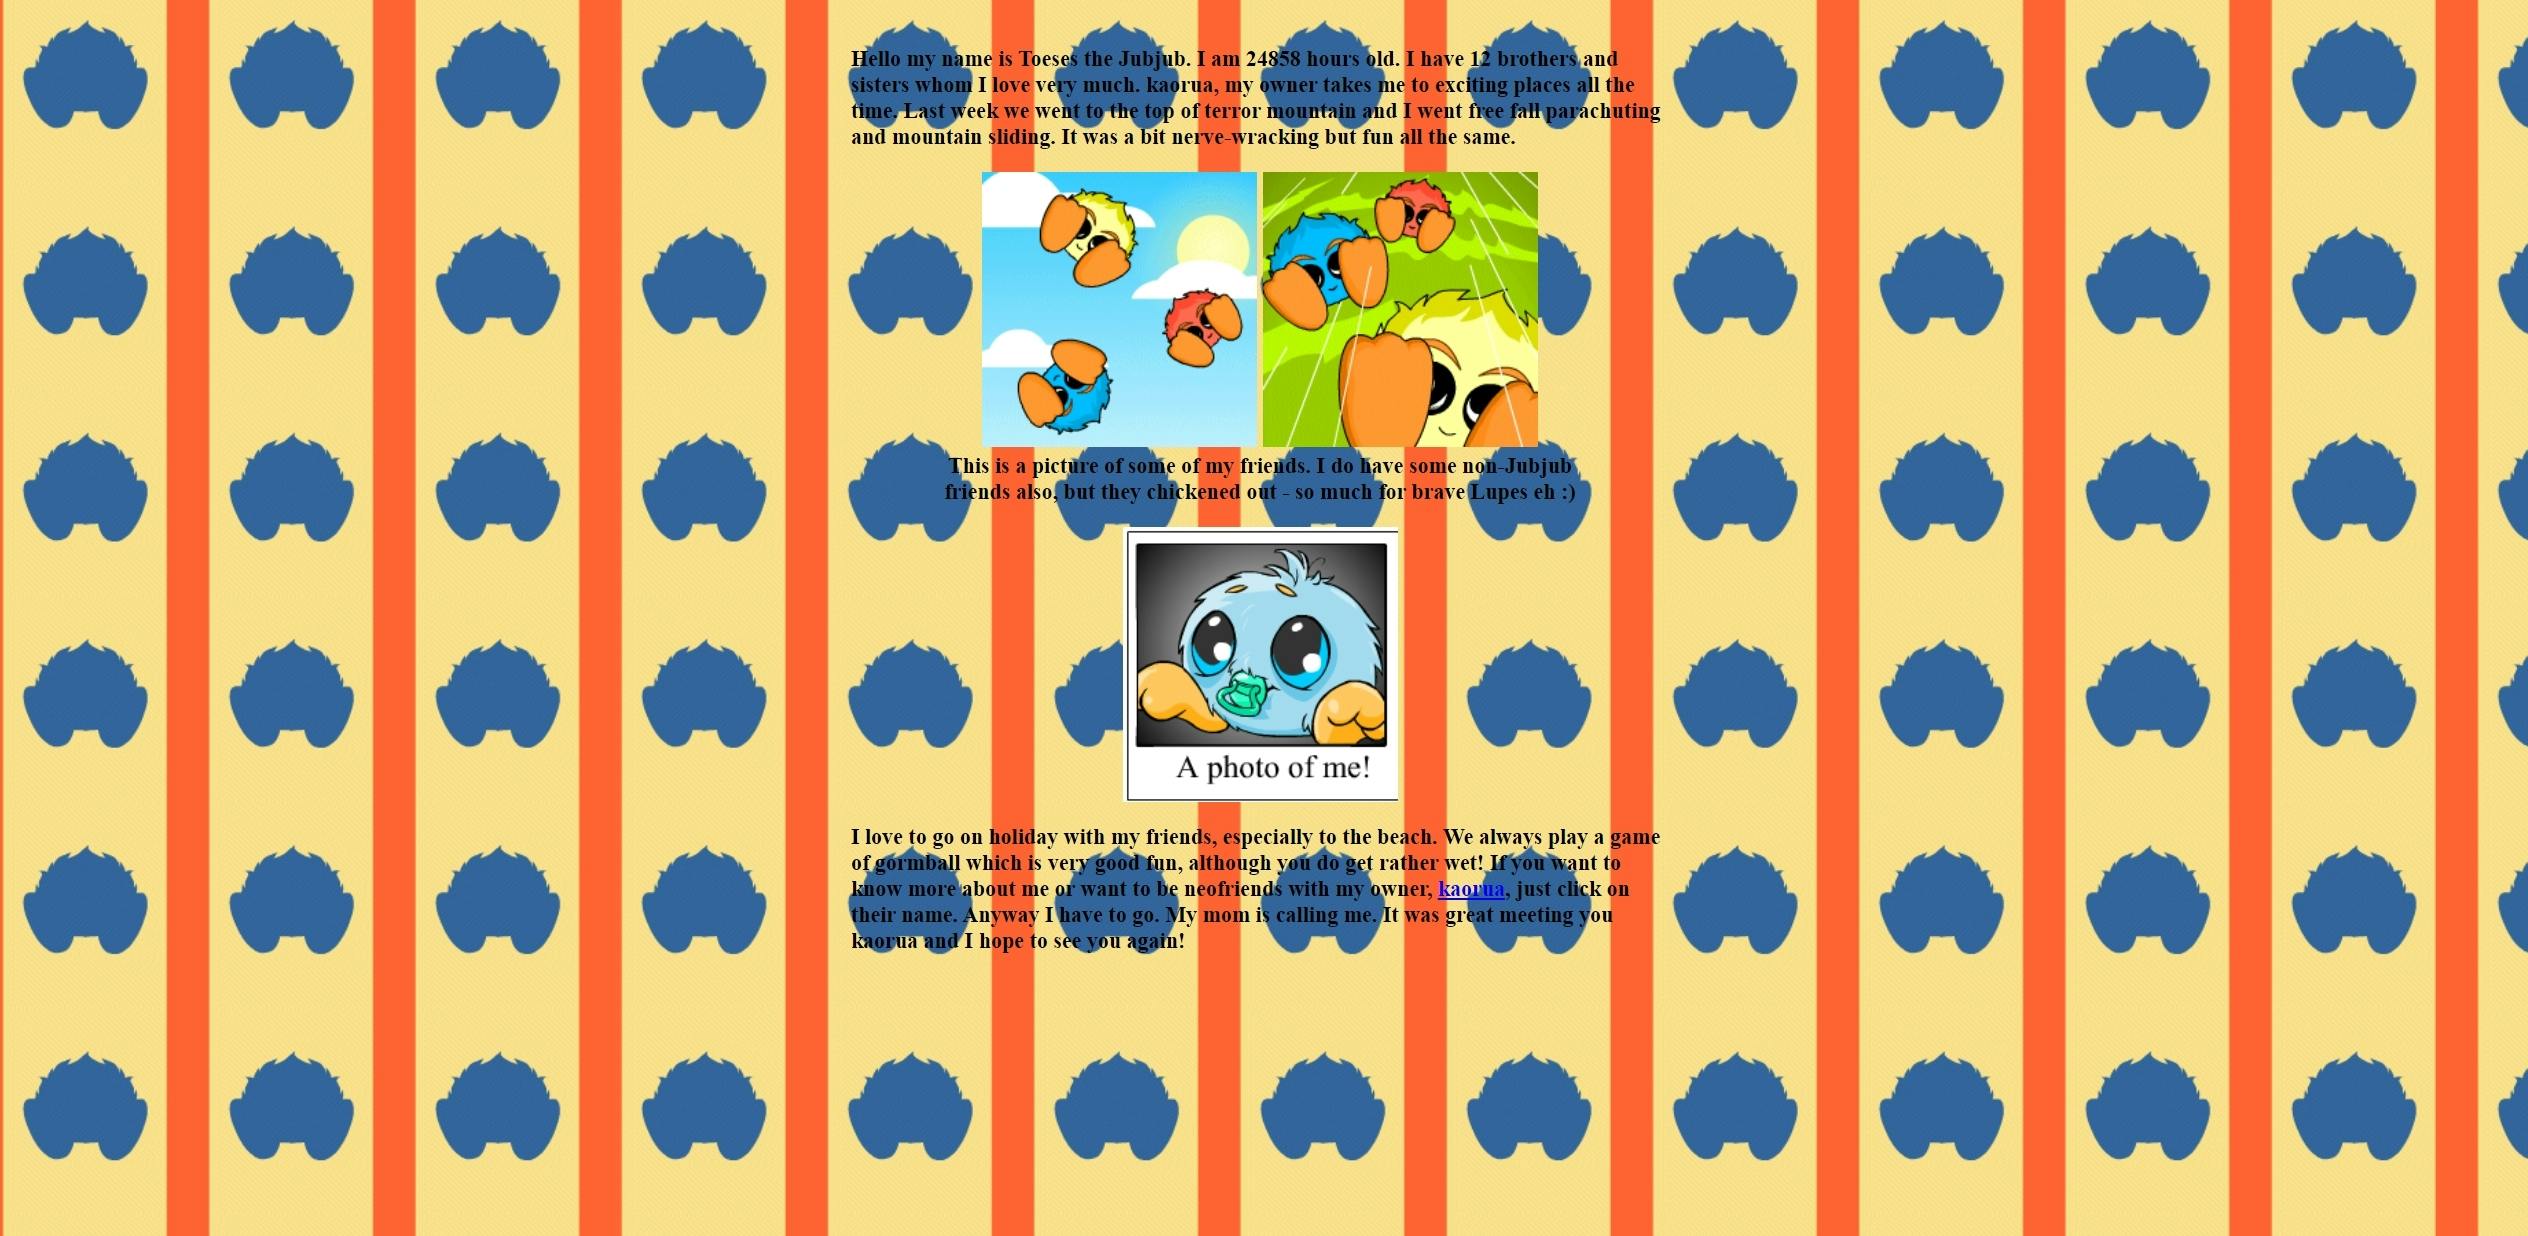 A display of what a default webpage looks like for a Neopet, from the popular website neopets.com